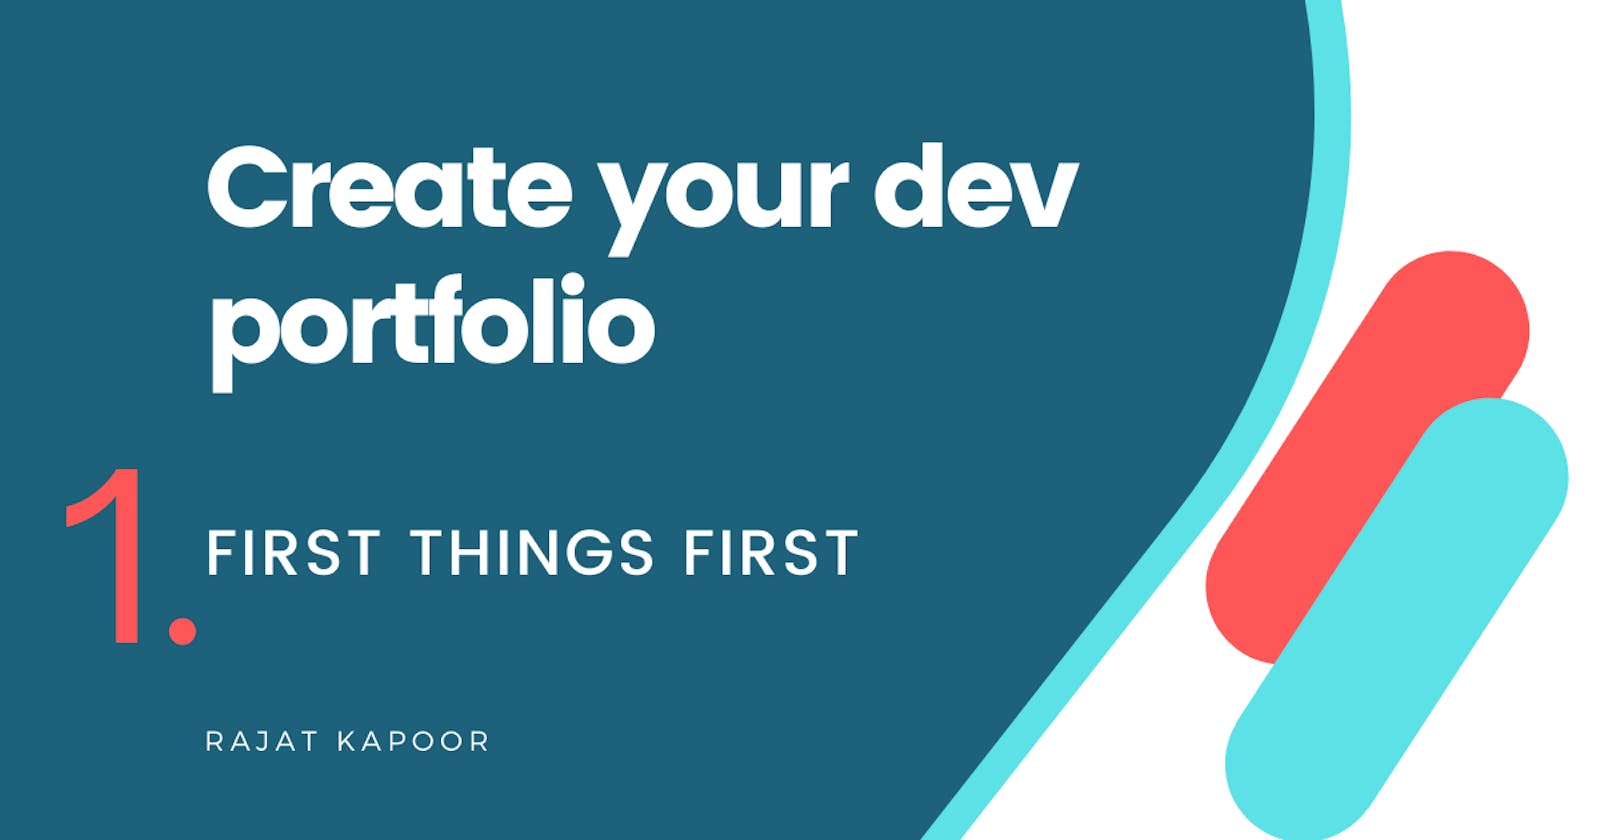 Create your dev portfolio - Part 1: First things first